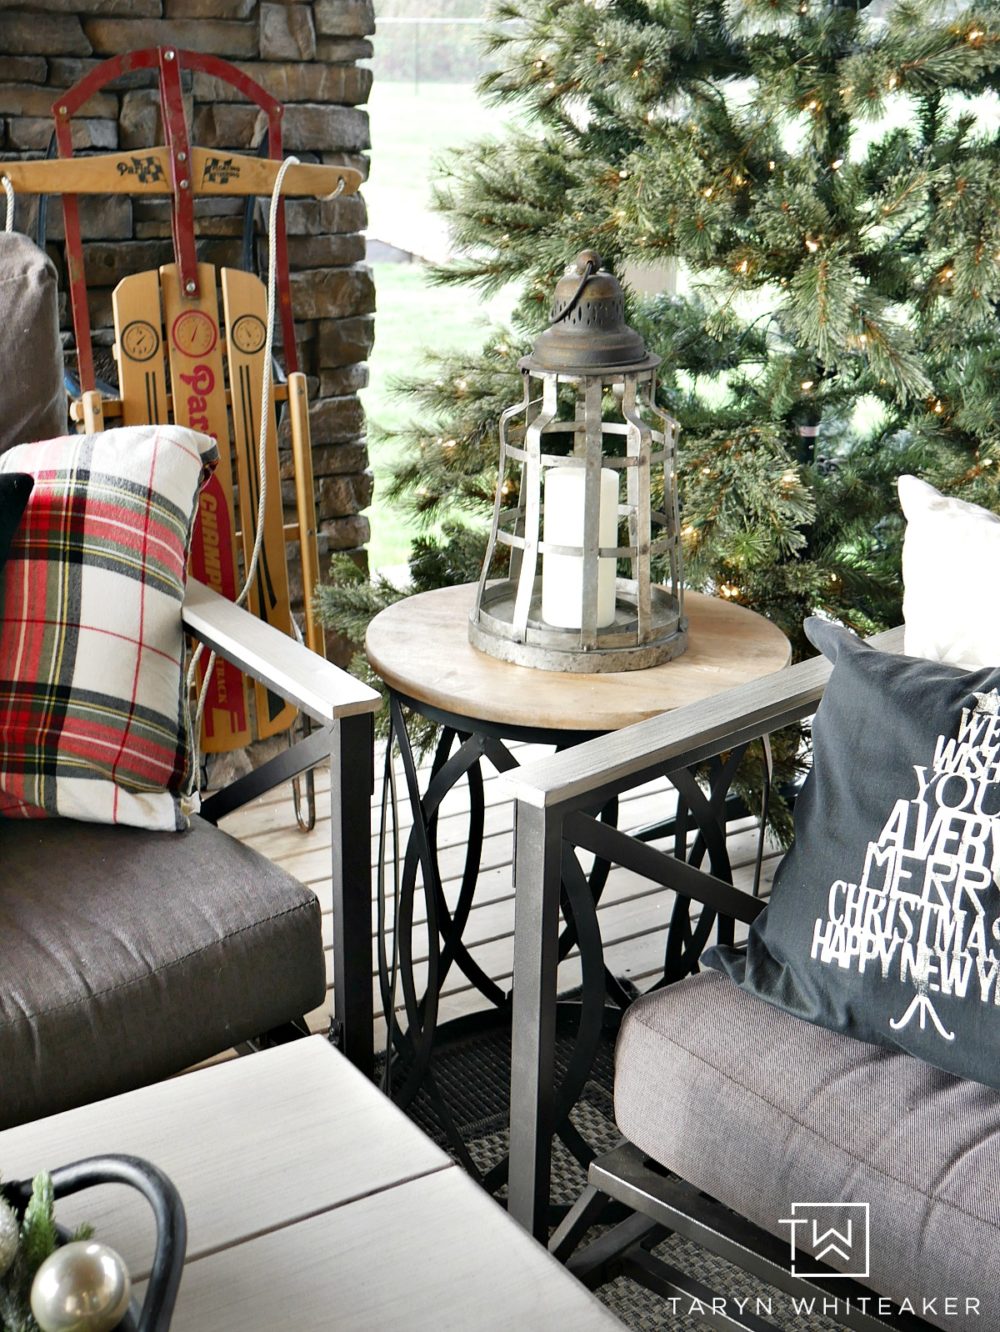 Come see our Outdoor Living Space at Christmas ! It's feeling oh so cozy with it's own Christmas tree, stockings and lots of plaid!